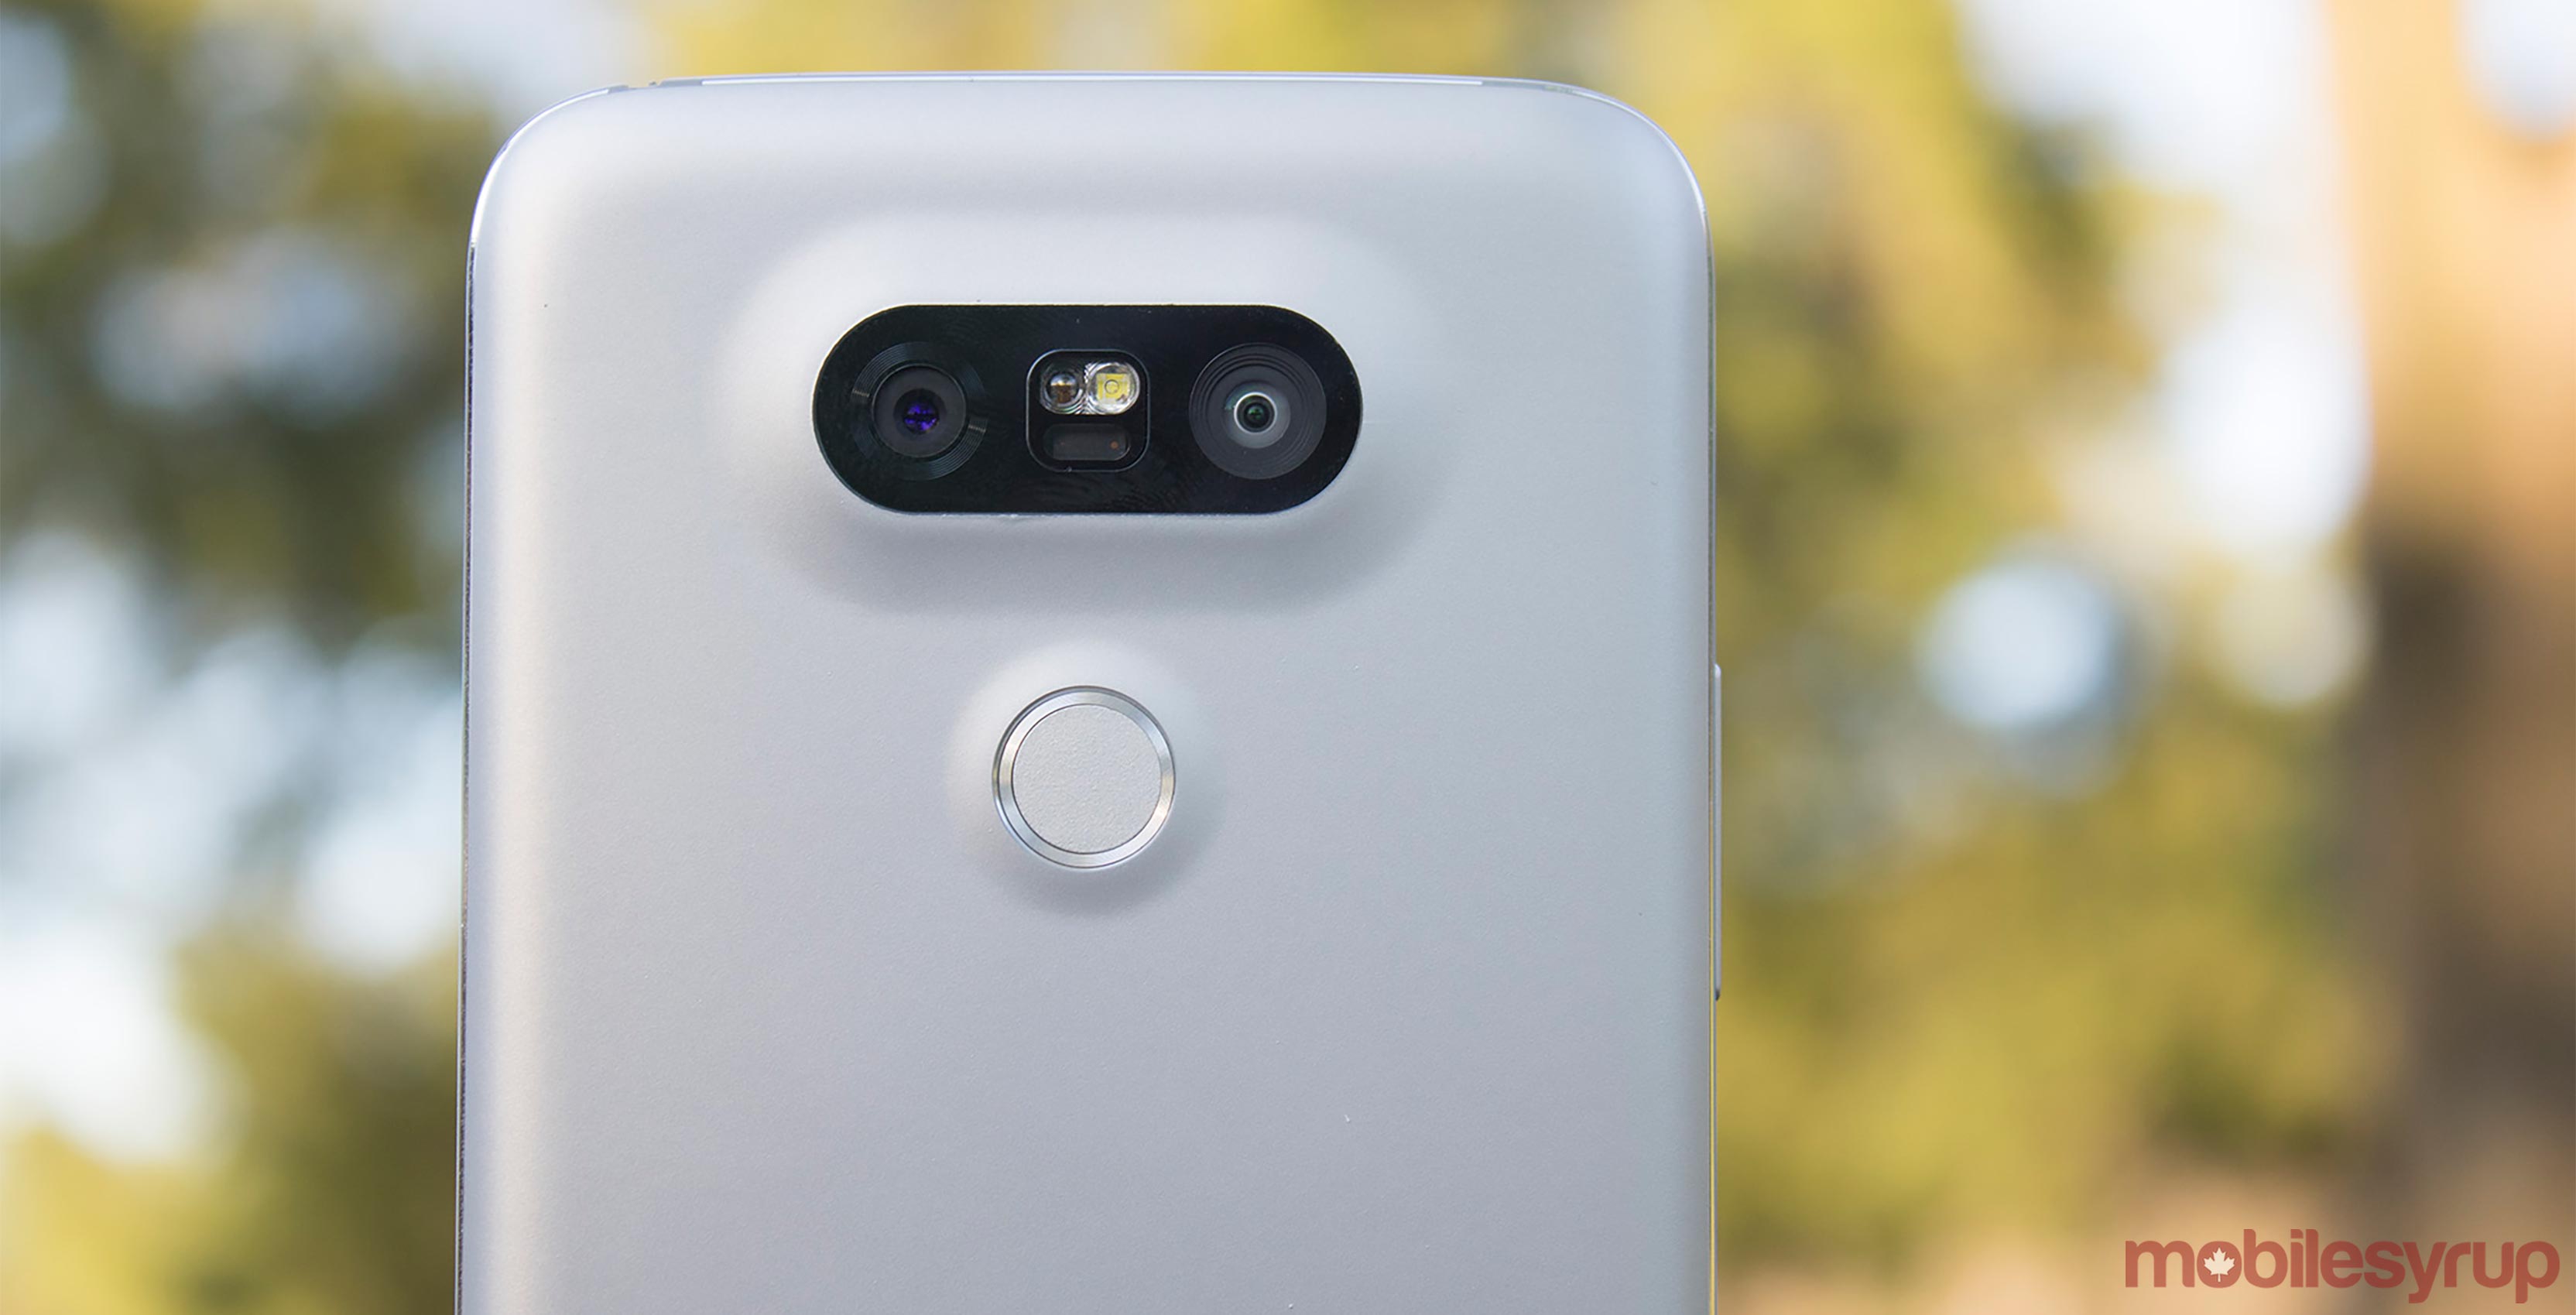 Photo of the LG G5